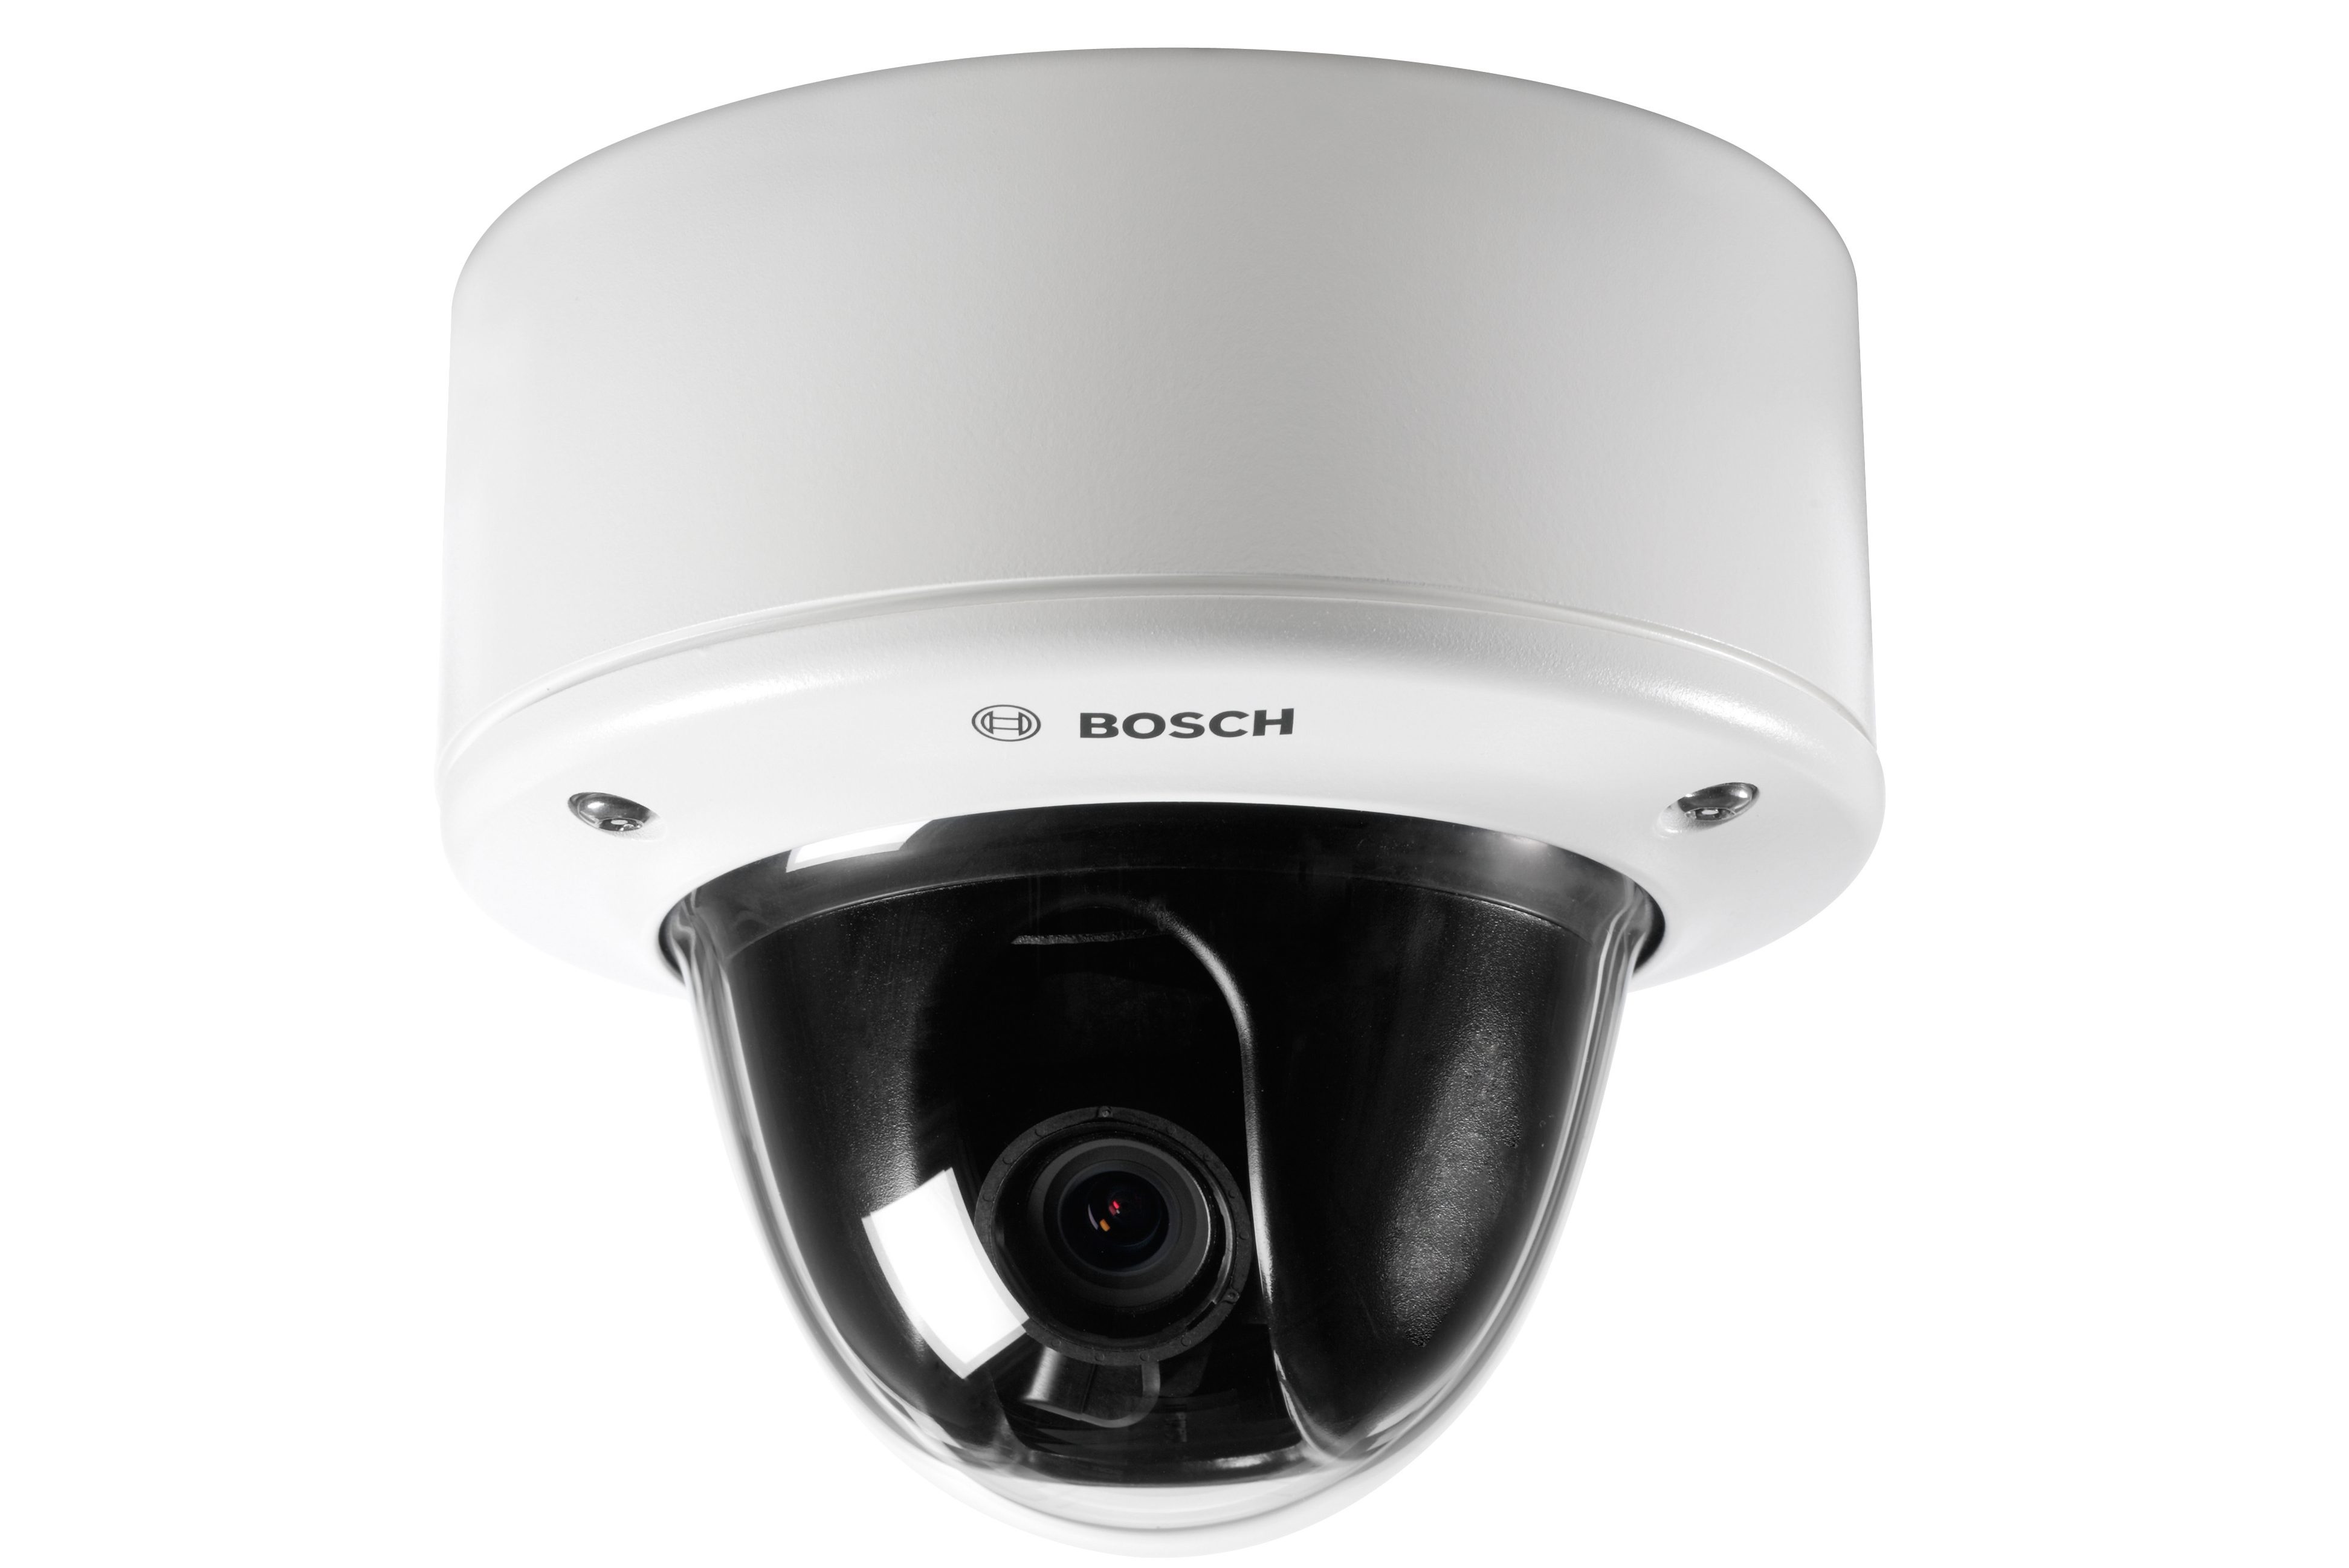 Bosch partners with Sony on video security systems